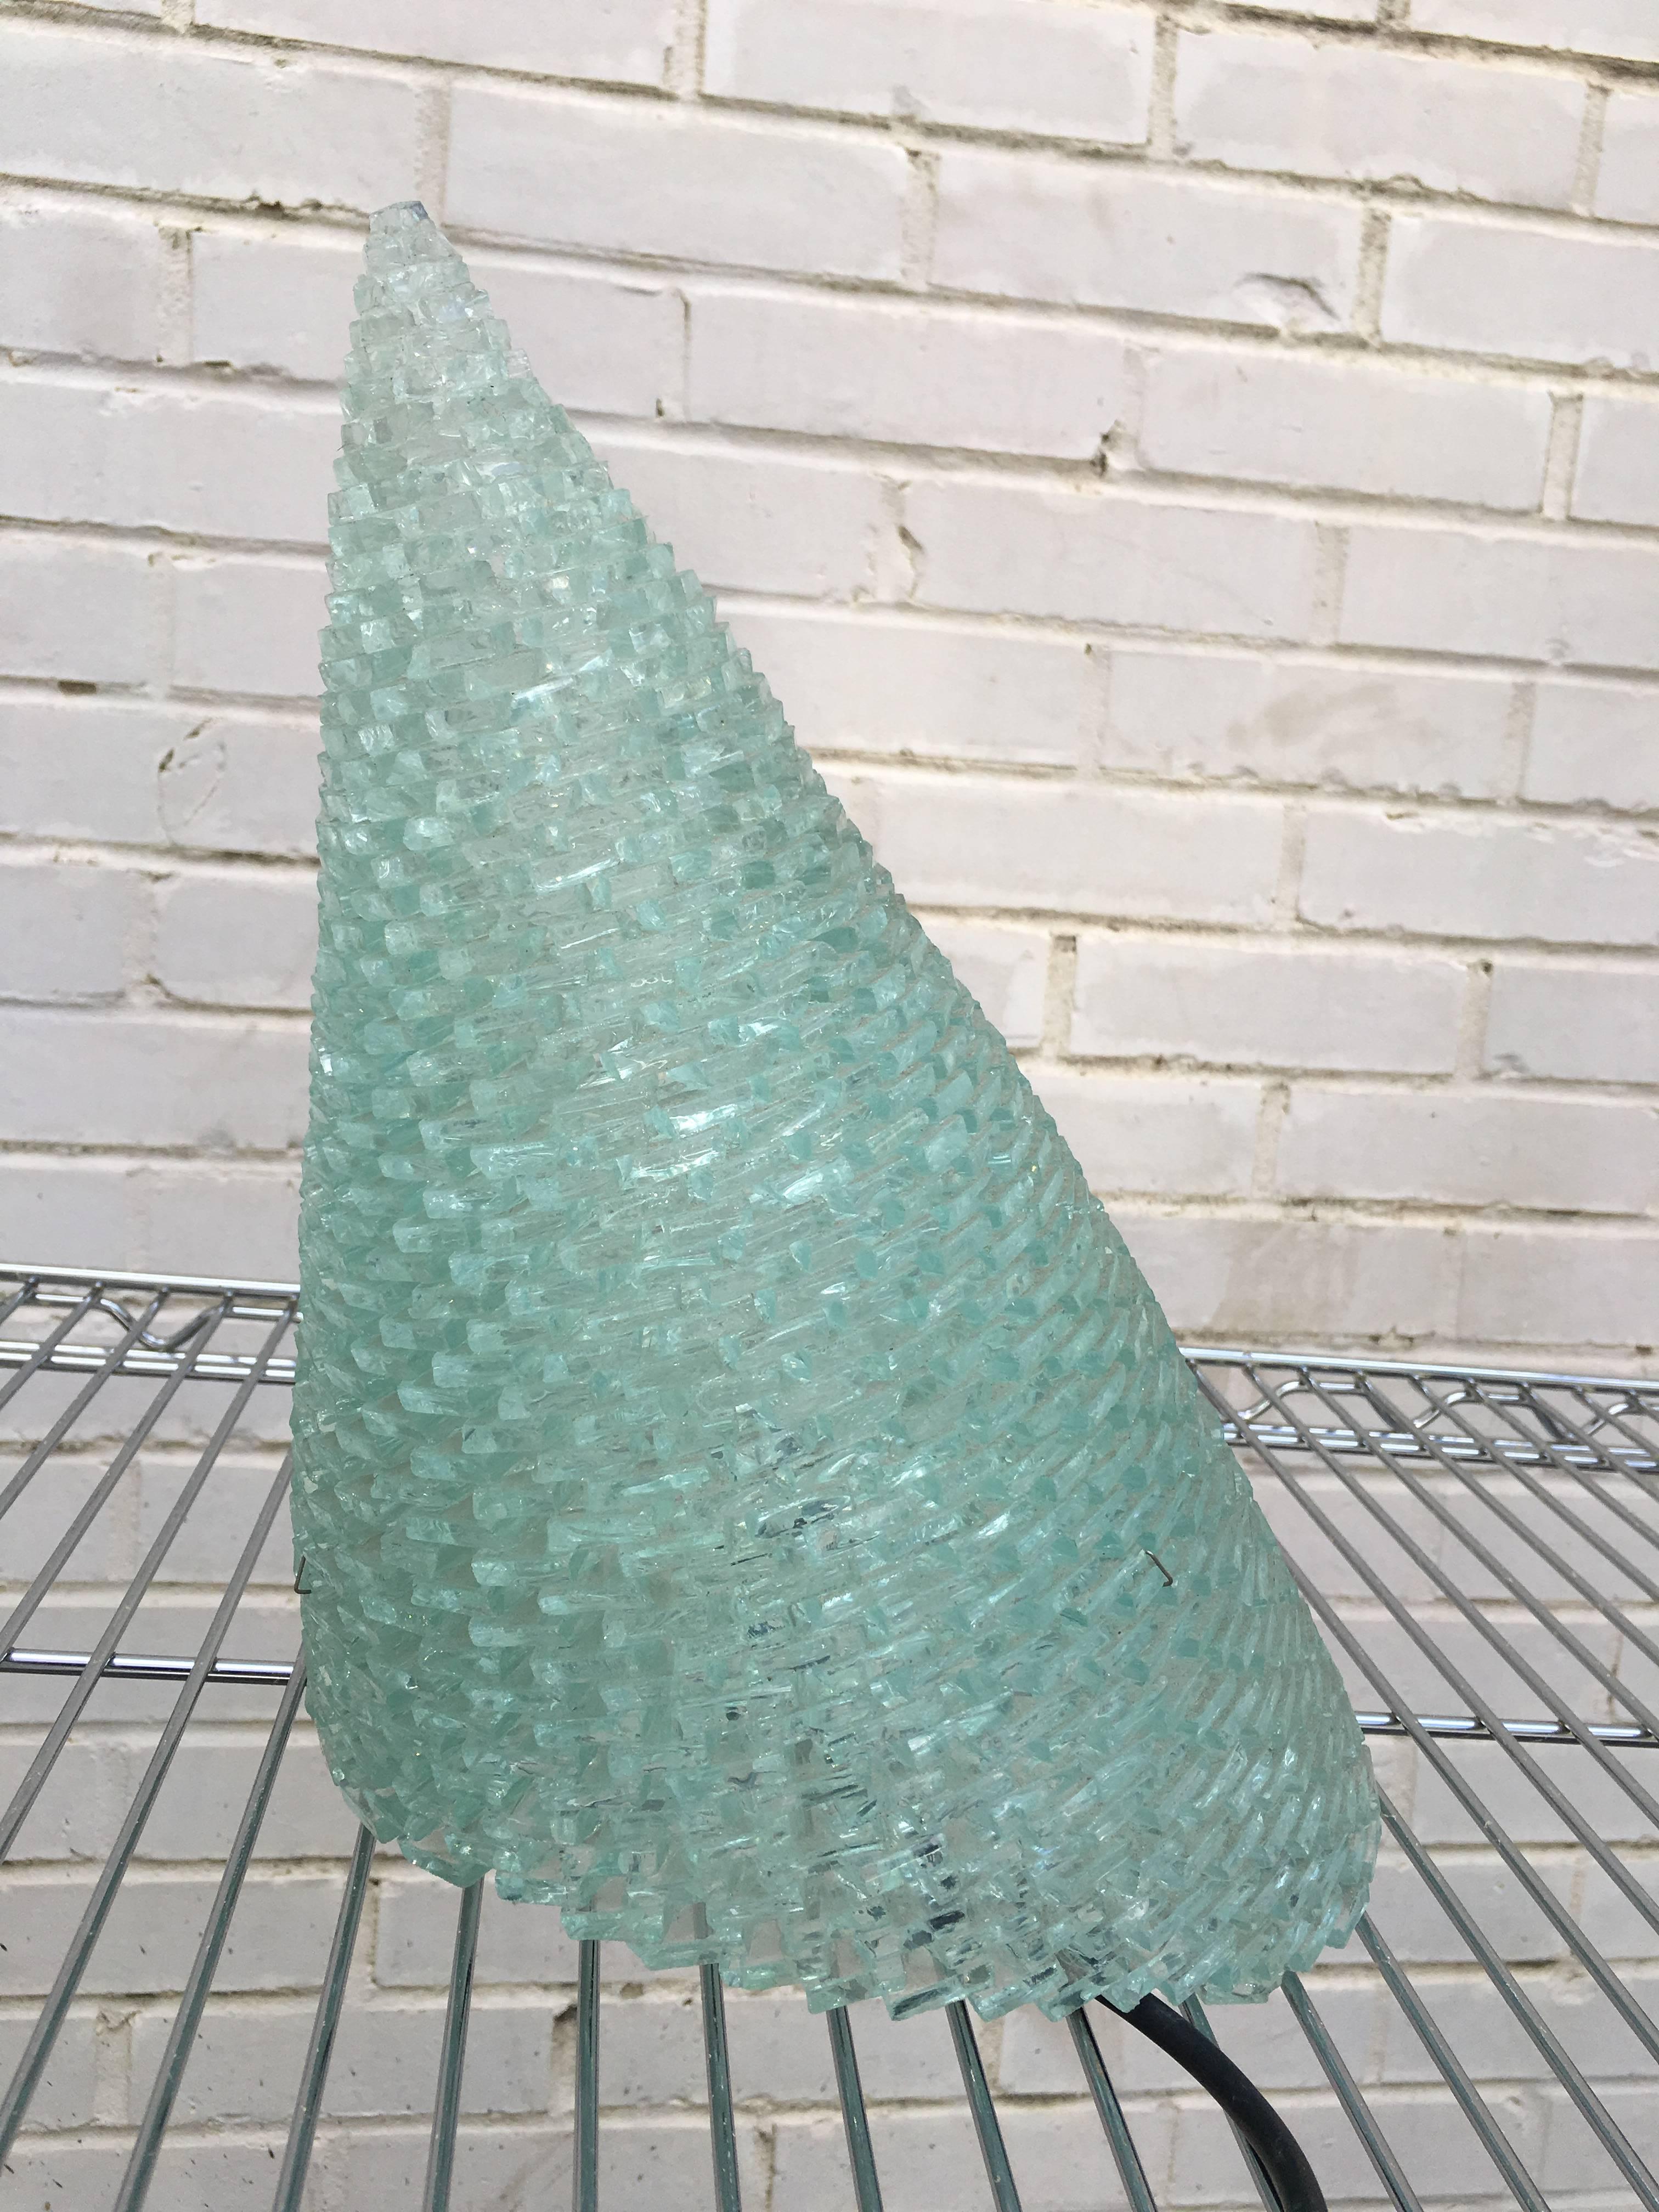 Exceptional Italian glass block cone table lamp. This unusual design is comprised of tiny glass pieces which form a slanted cone design. Bulb is Halogen. Truly a unique lamp for any decor.